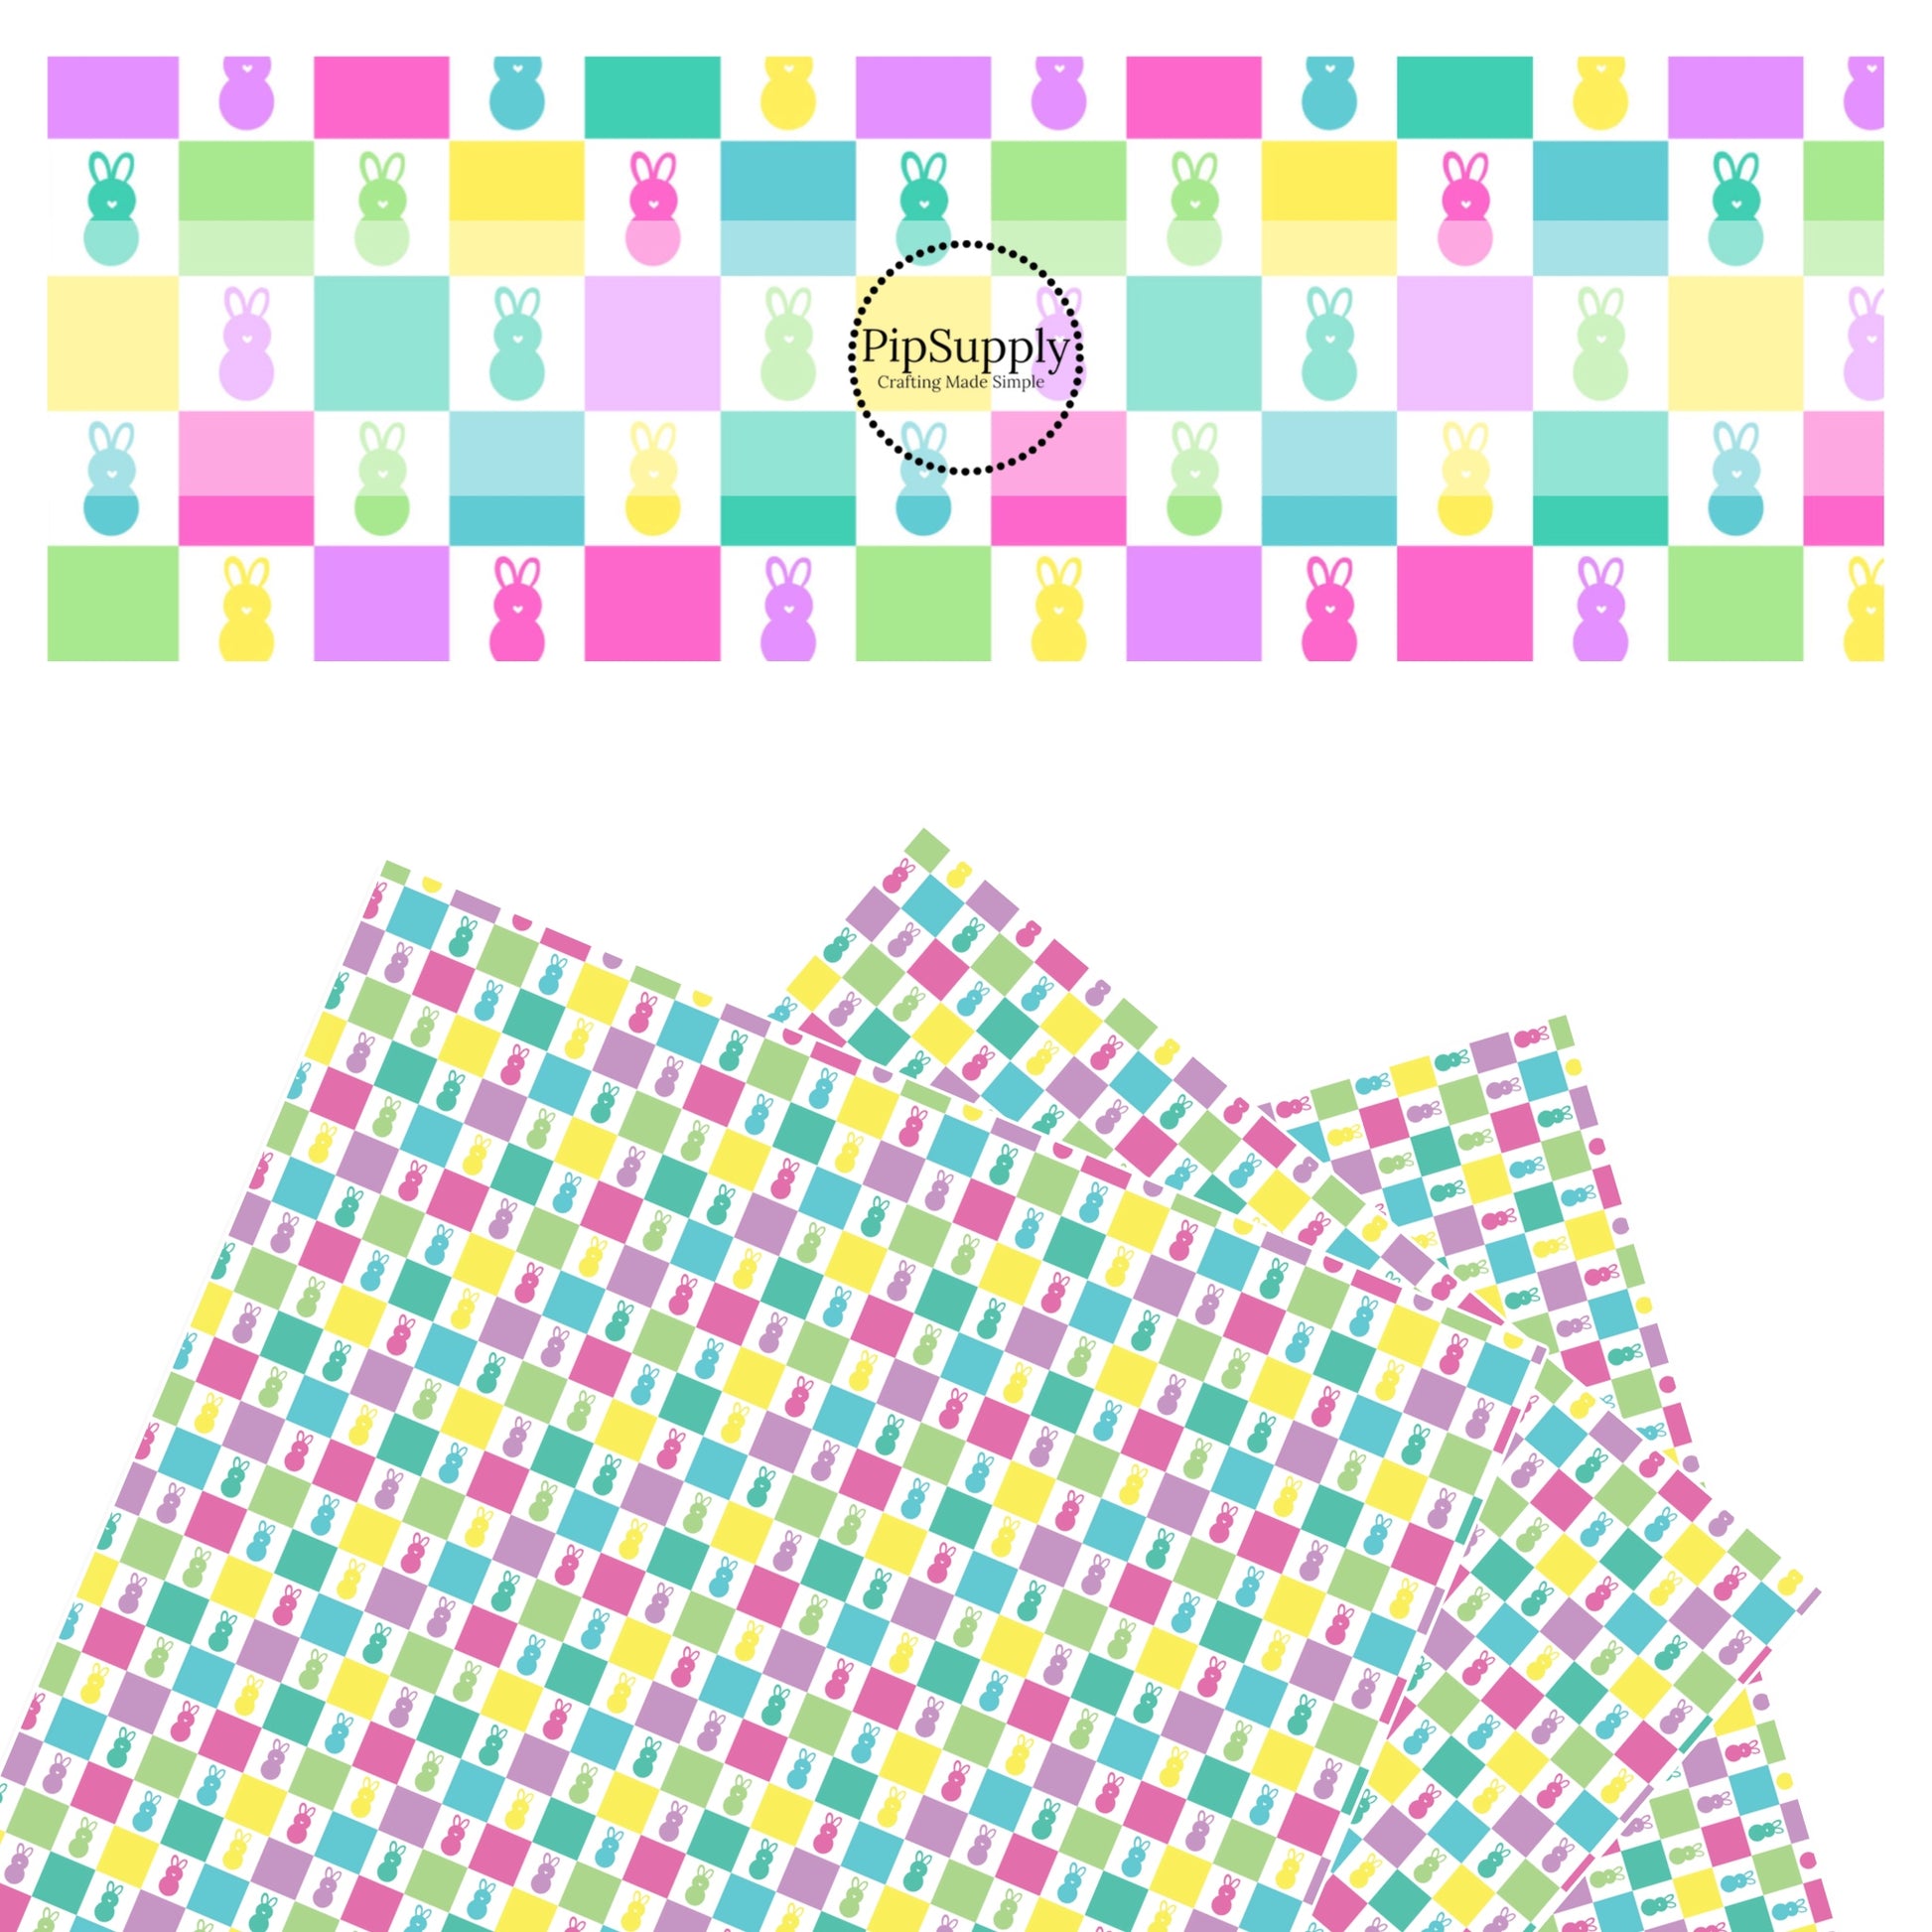 Hot pink, purple, yellow, turquoise, and green bunnies on coordinating checker faux leather sheets